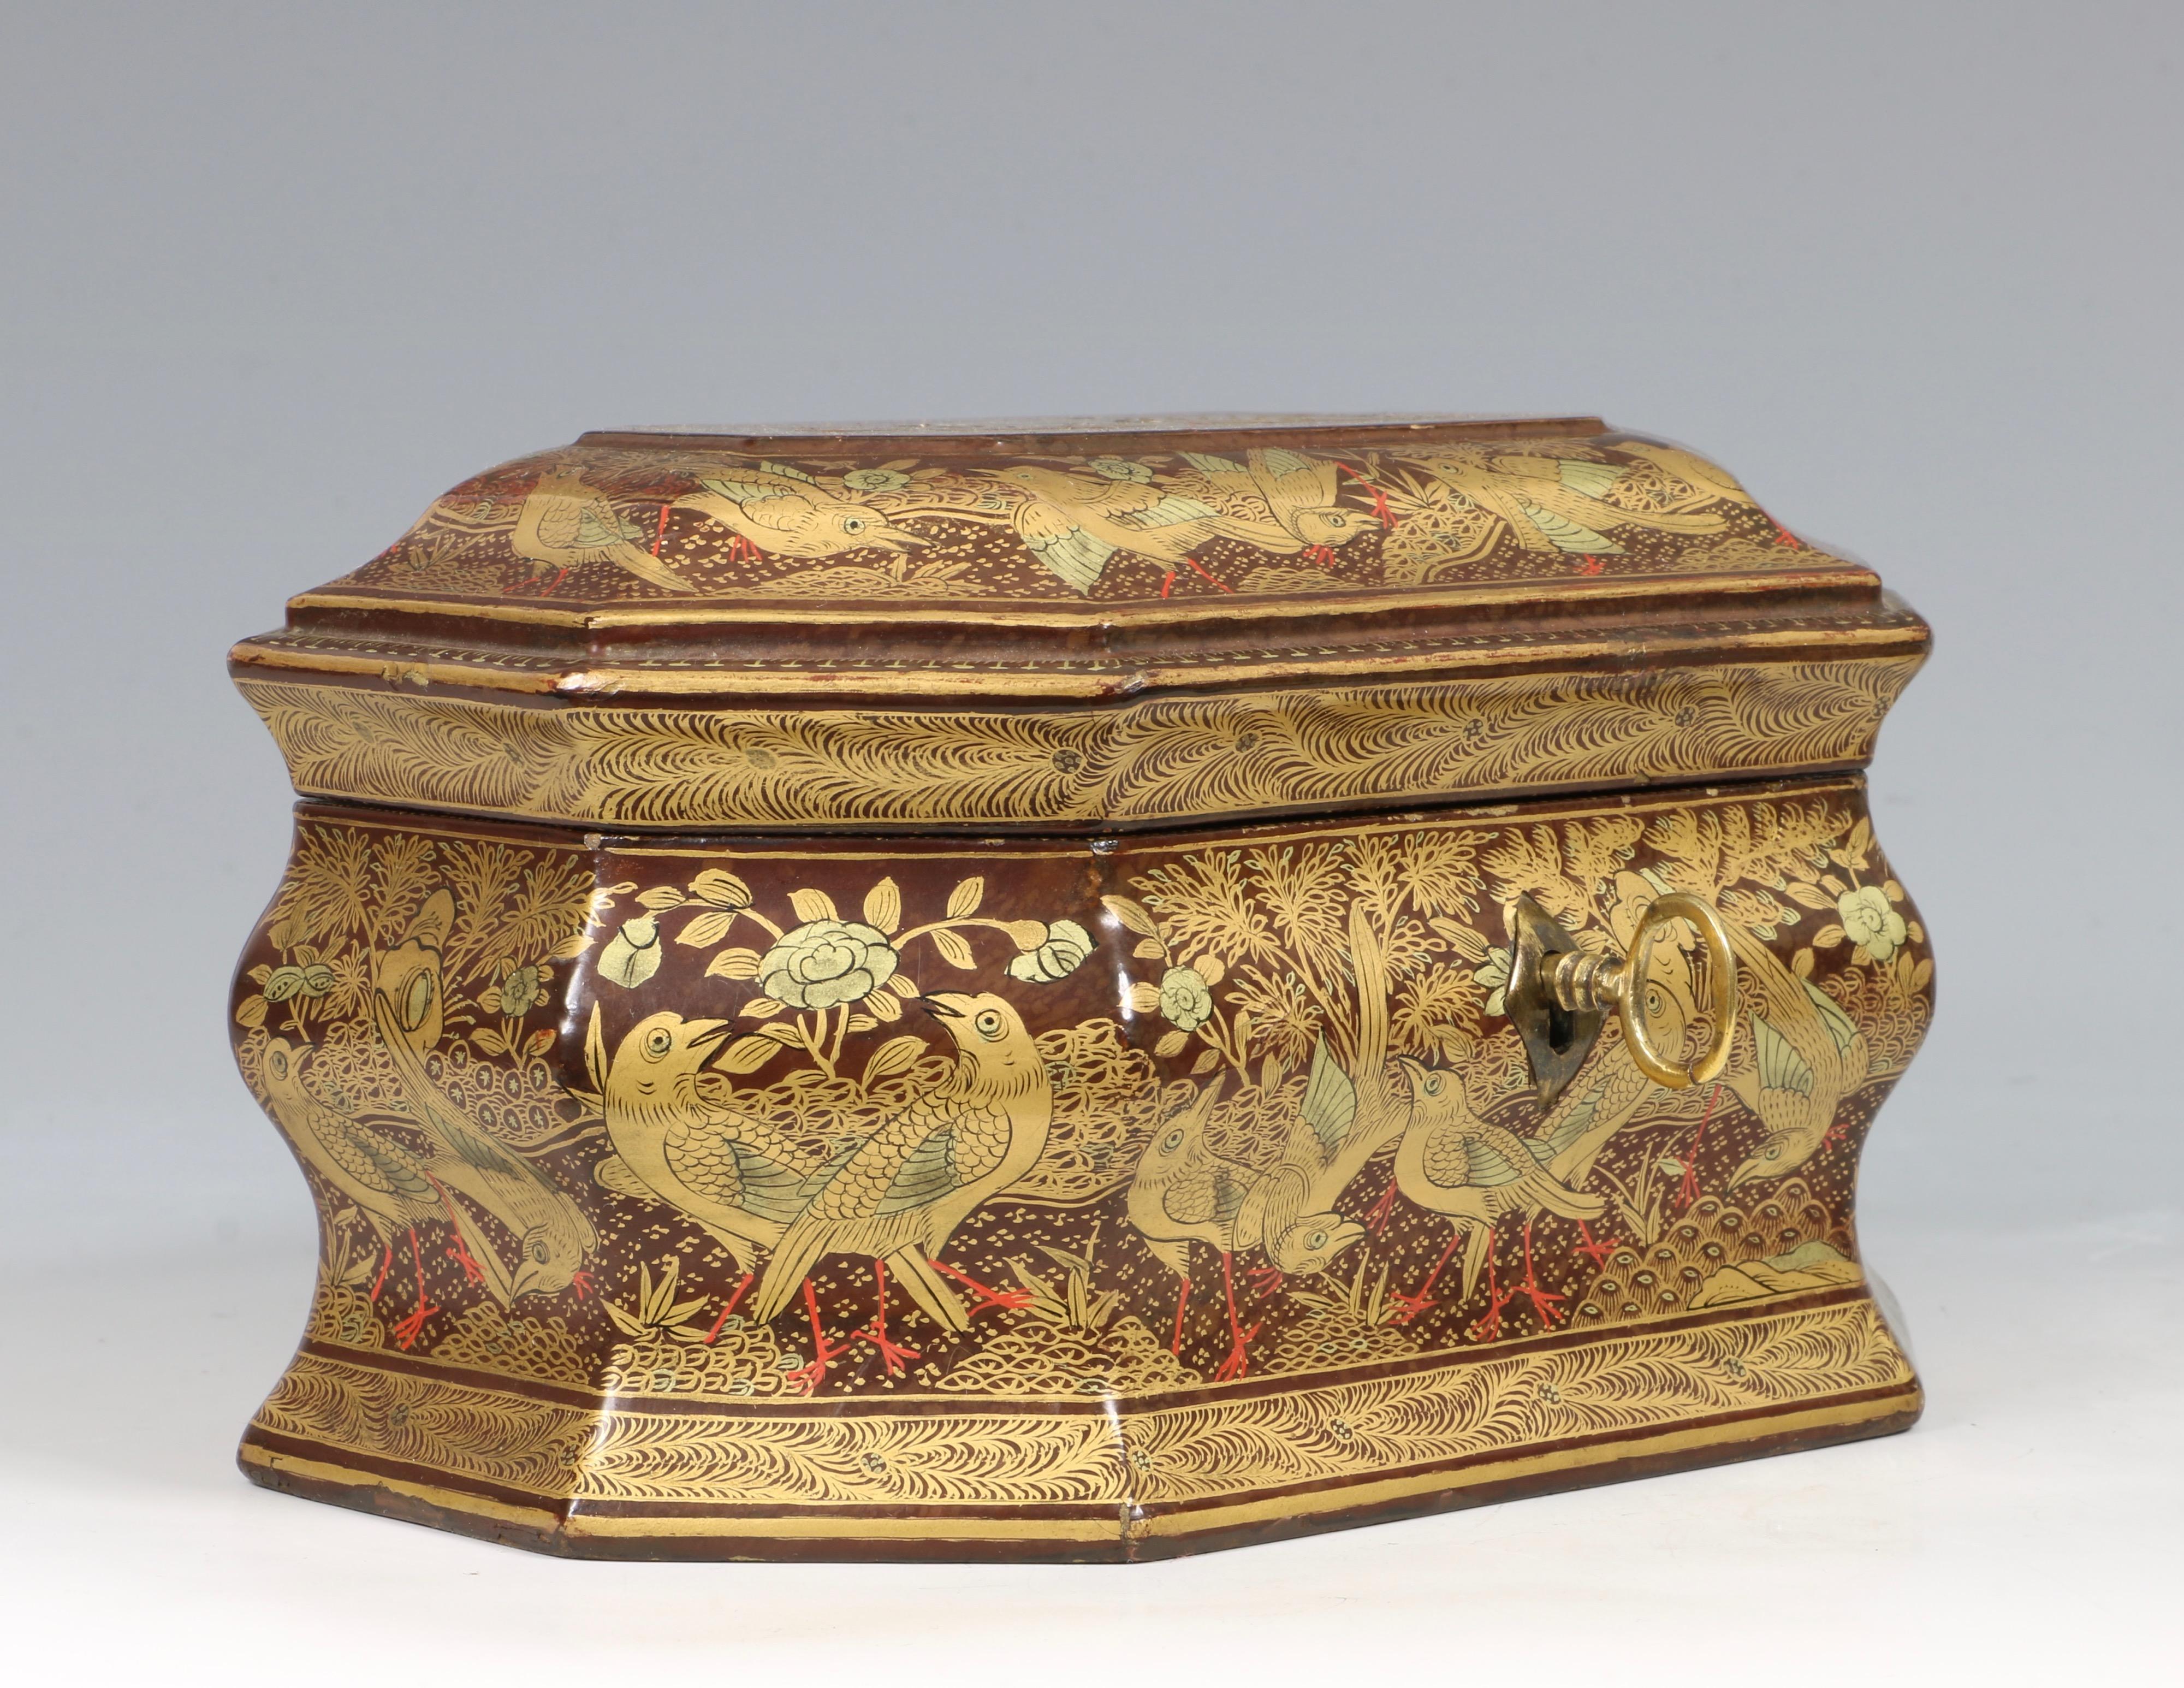 Painted Fine Chinese Canton Lacquer Export Tea Caddy, Mid-19th Century For Sale